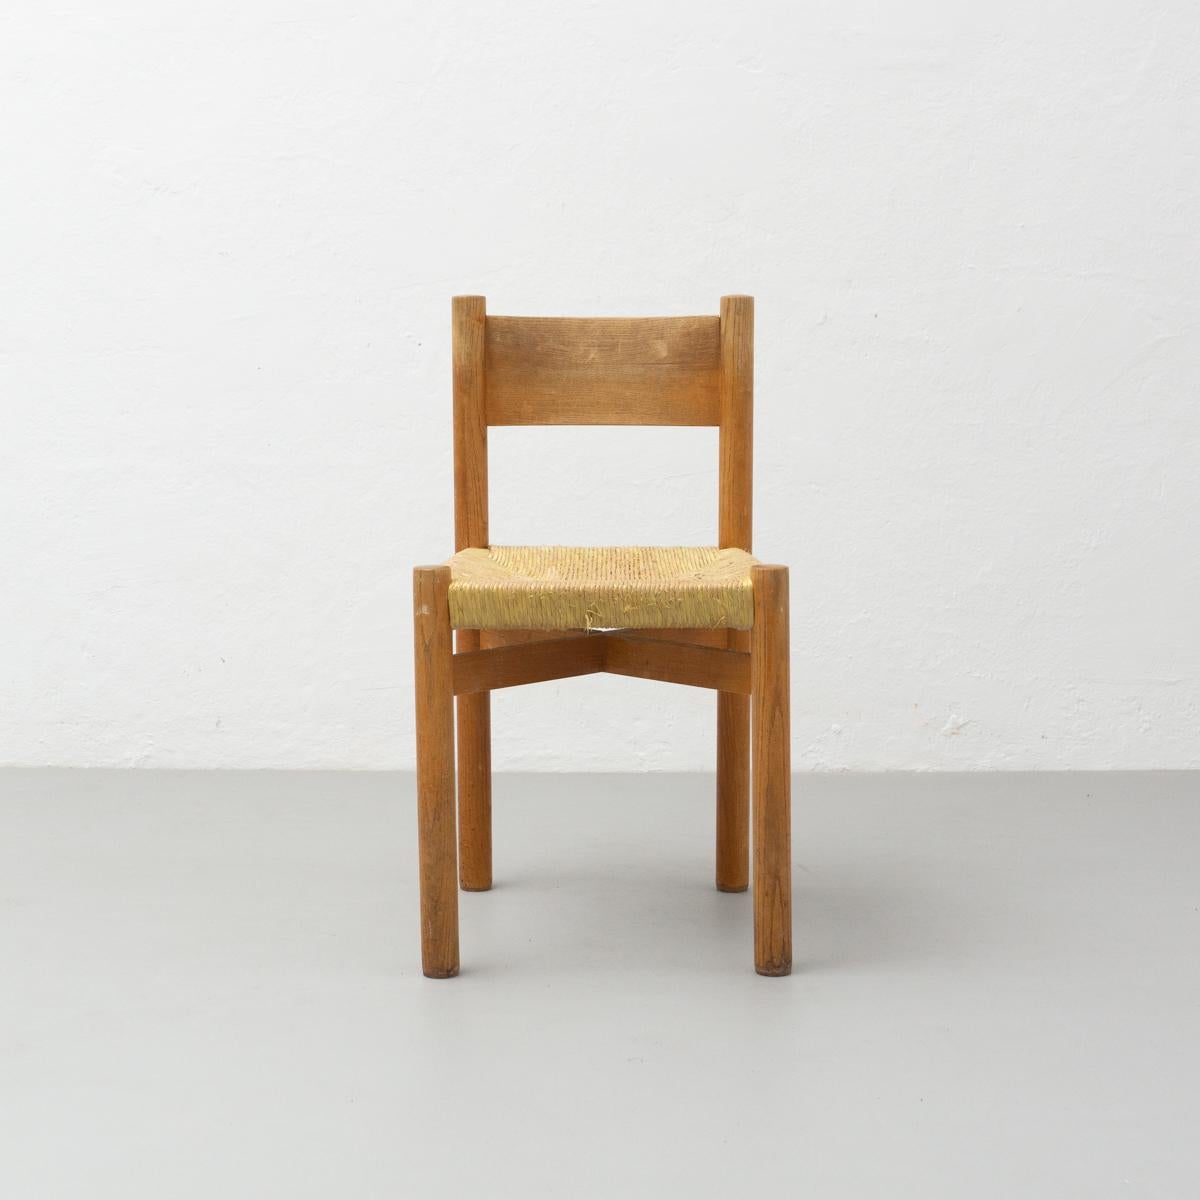 Chair model Meribel designed by Charlotte Perriand, circa 1950.
Manufactured in France.

Wood and rattan.

In original condition, with minor wear consistent with age
and use, preserving a beautiful patina.

Charlotte Perriand (1903-1999) She